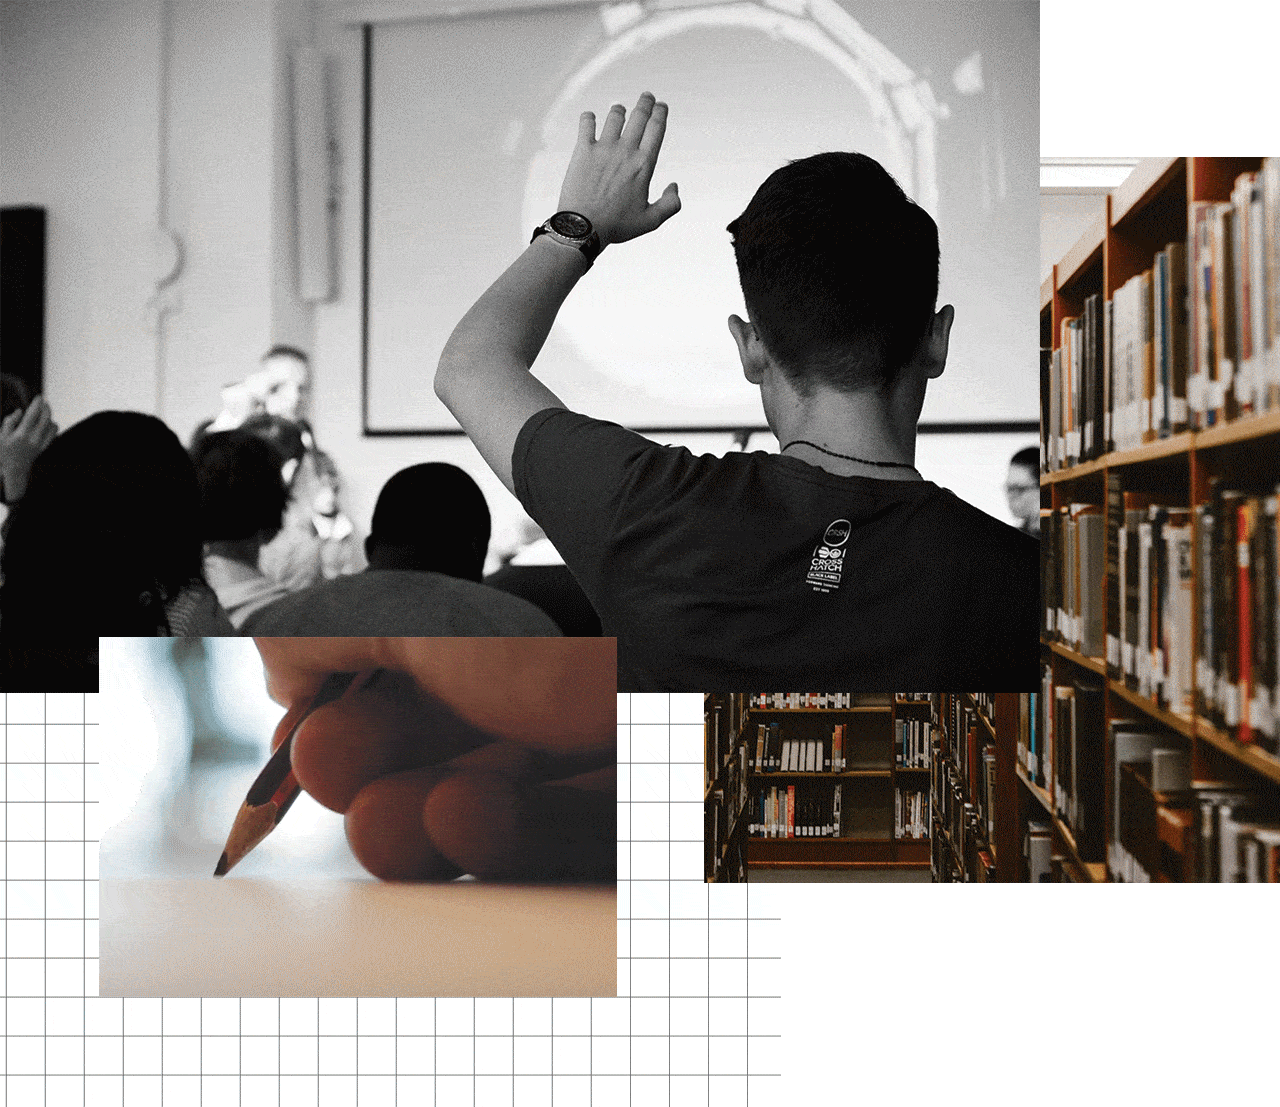 A collage (clockwise): 1) A student raising their hand in a classroom. 2) Stacks of books in a library. 3) A GIF of a hand writing on paper.